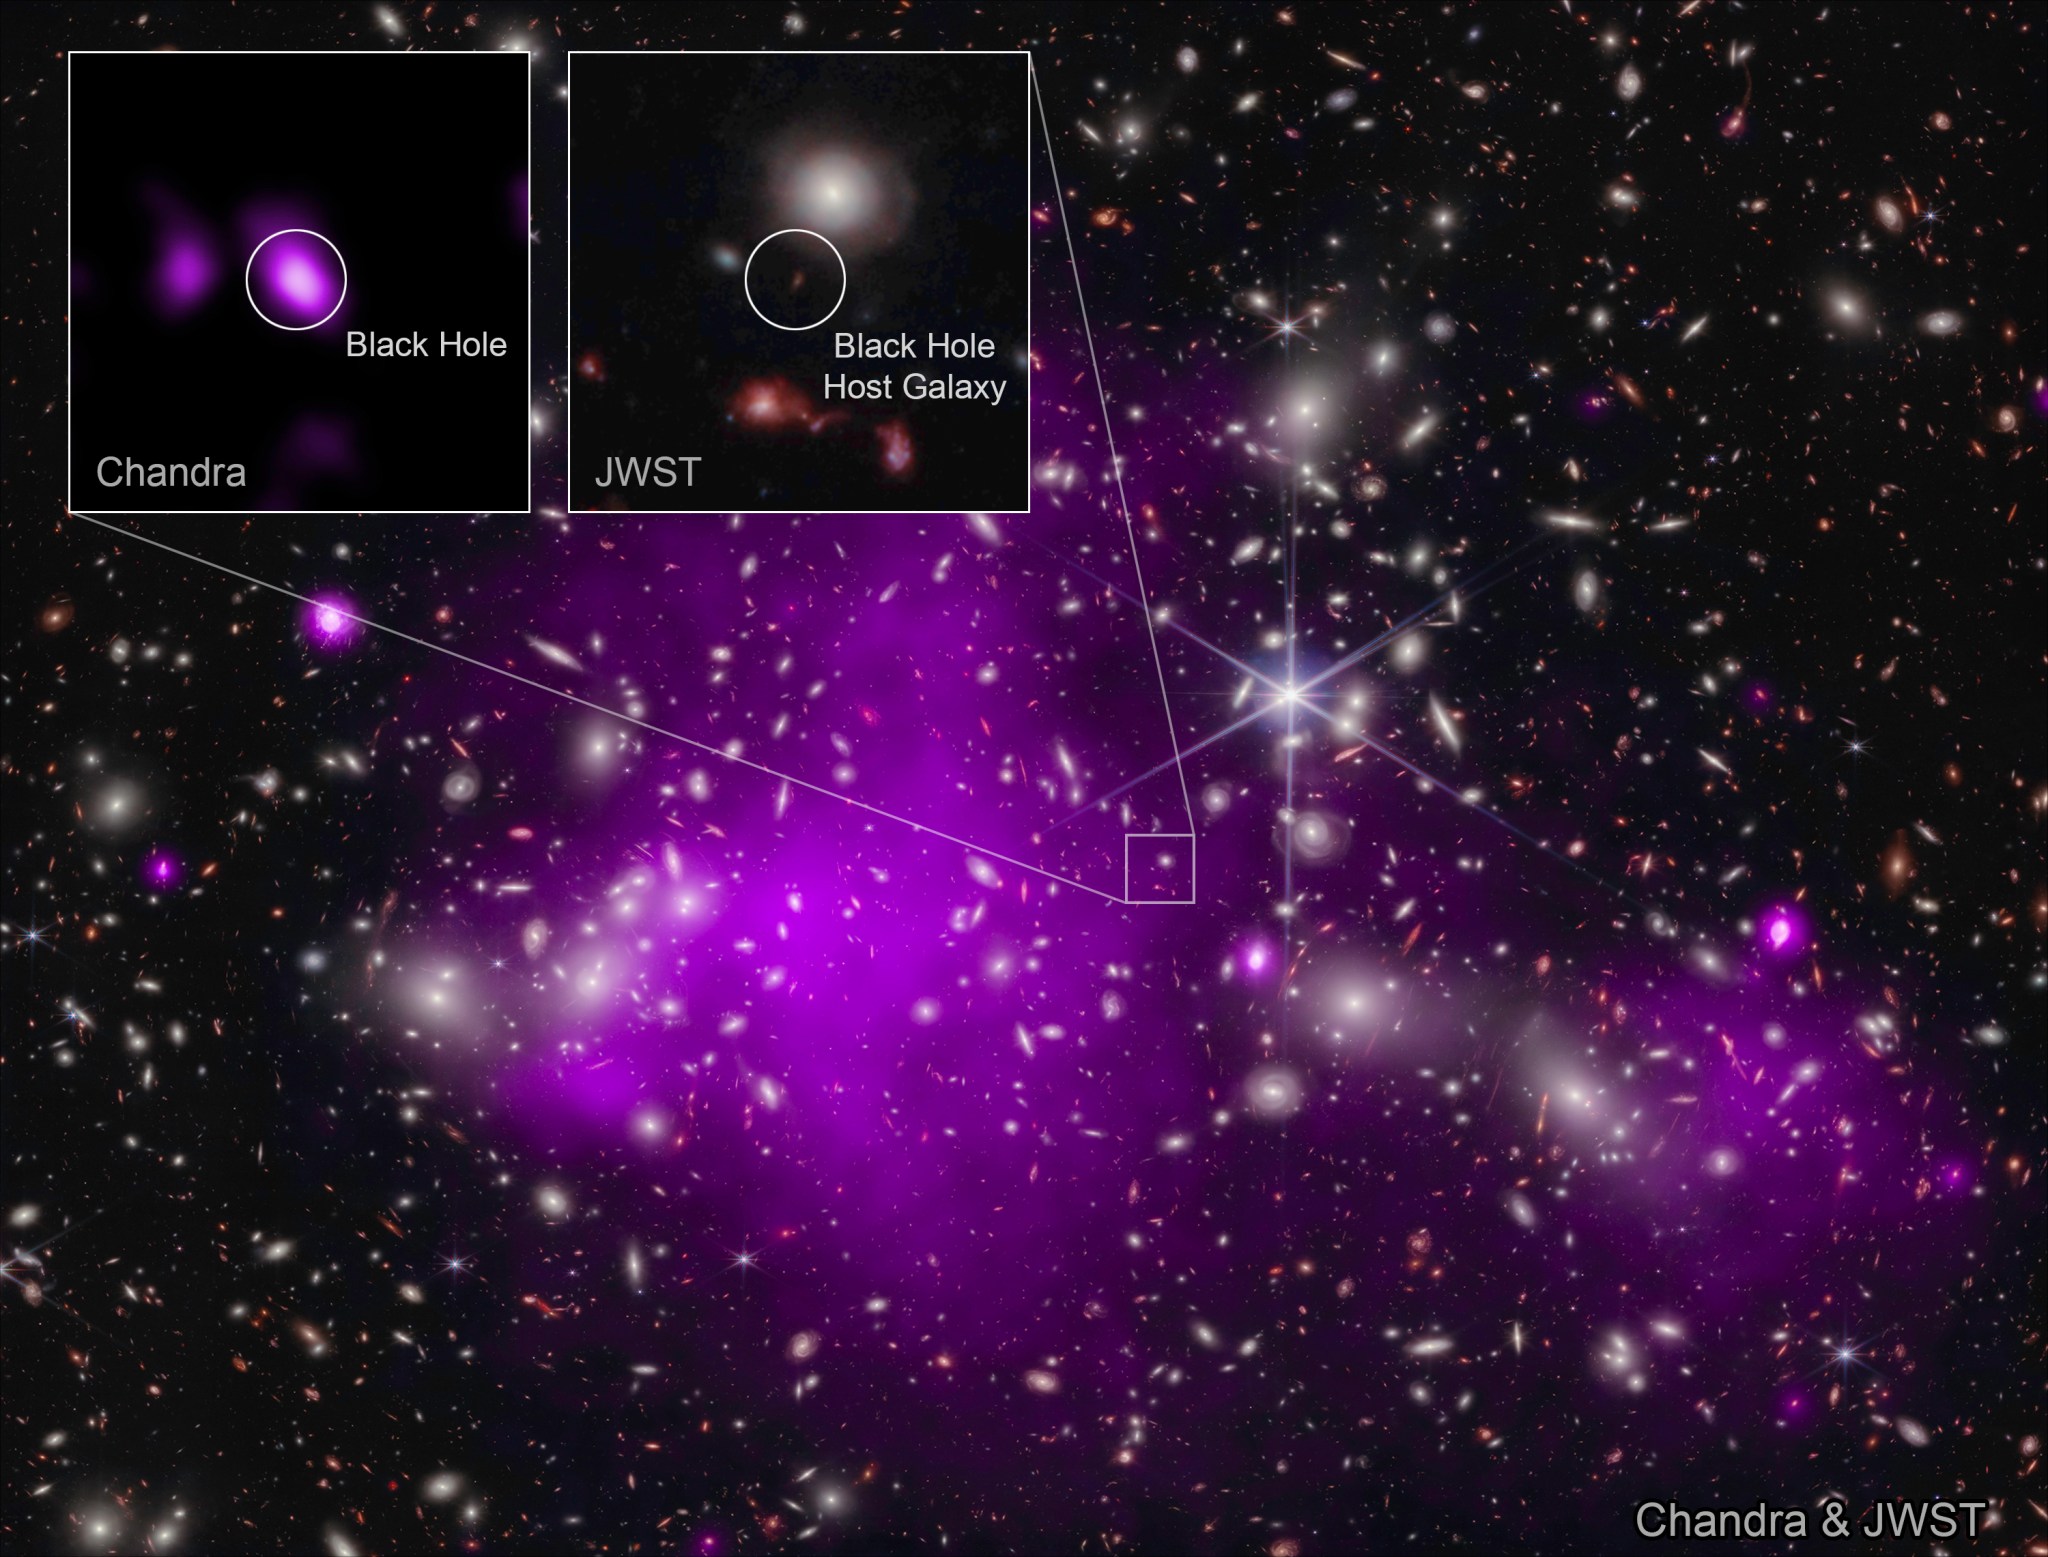 Astronomers found the most distant black hole ever detected in X-rays (in a galaxy dubbed UHZ1) using the Chandra and Webb space telescopes. X-ray emission is a telltale signature of a growing supermassive black hole. This result may explain how some of the first supermassive black holes in the universe formed. This image shows the galaxy cluster Abell 2744 that UHZ1 is located behind, in X-rays from Chandra and infrared data from Webb, as well as close-ups of the black hole host galaxy UHZ1.